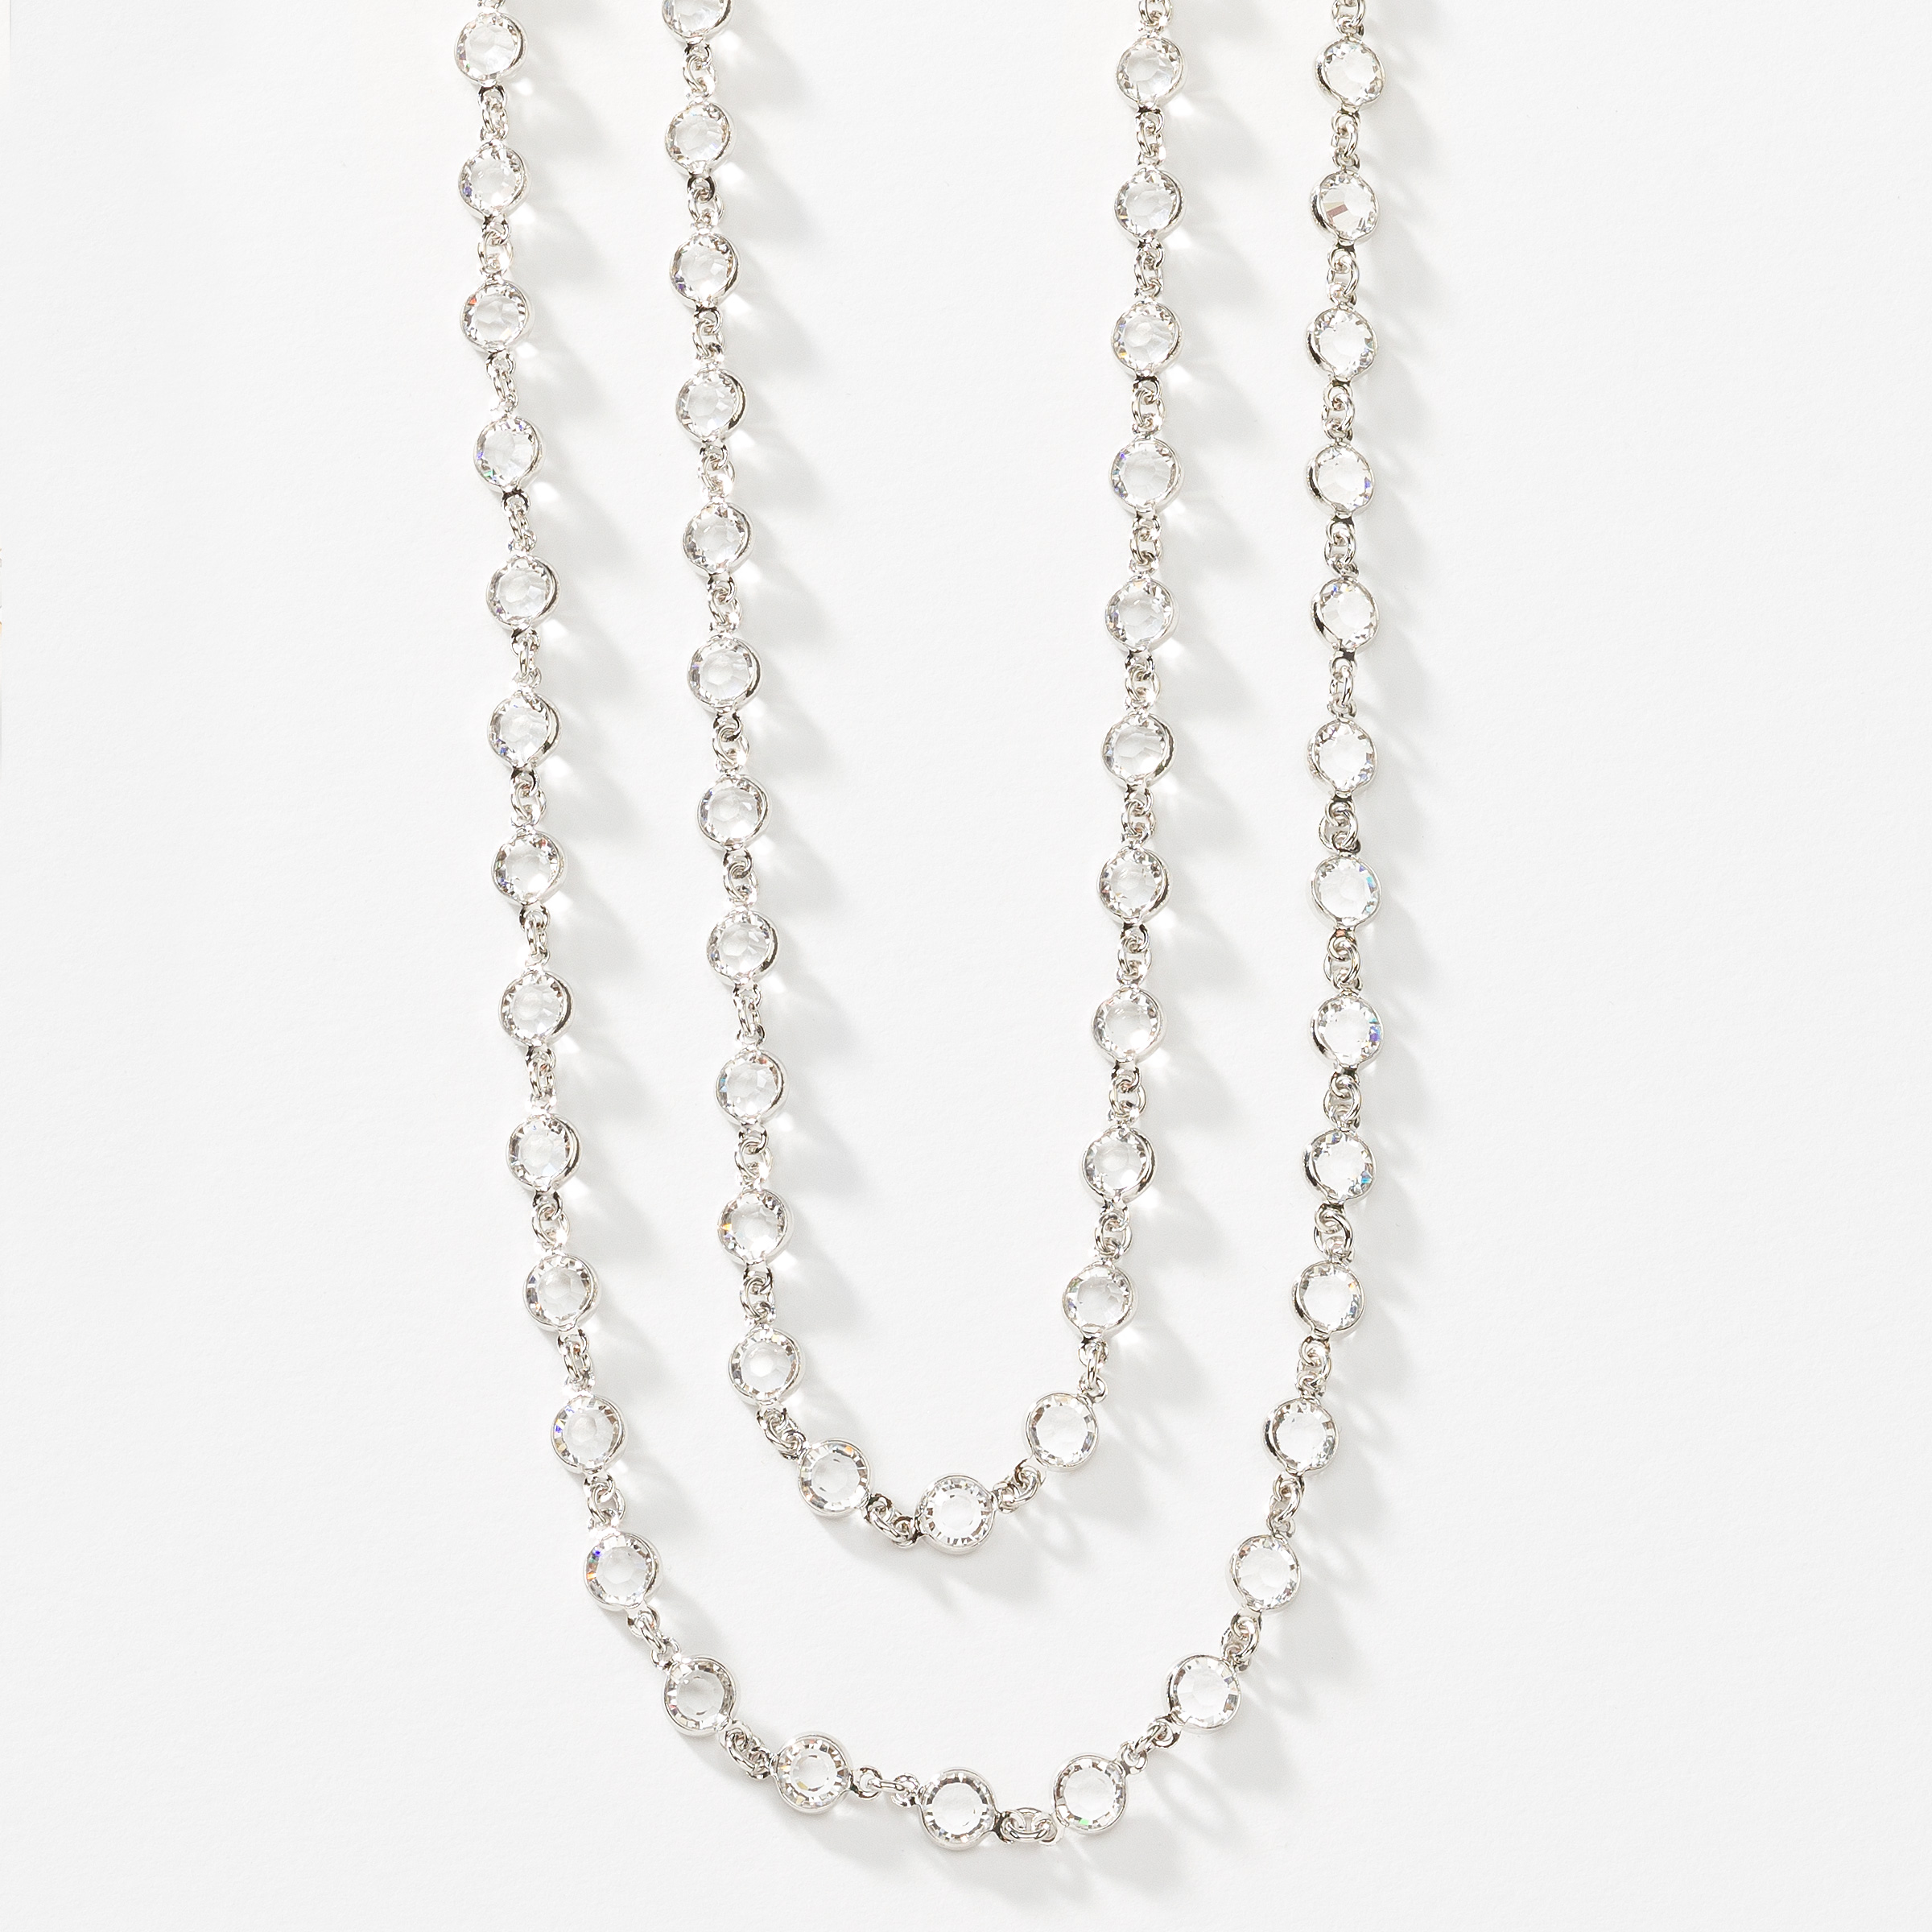 Mini Chanelle Extra Long Necklace, Crystal